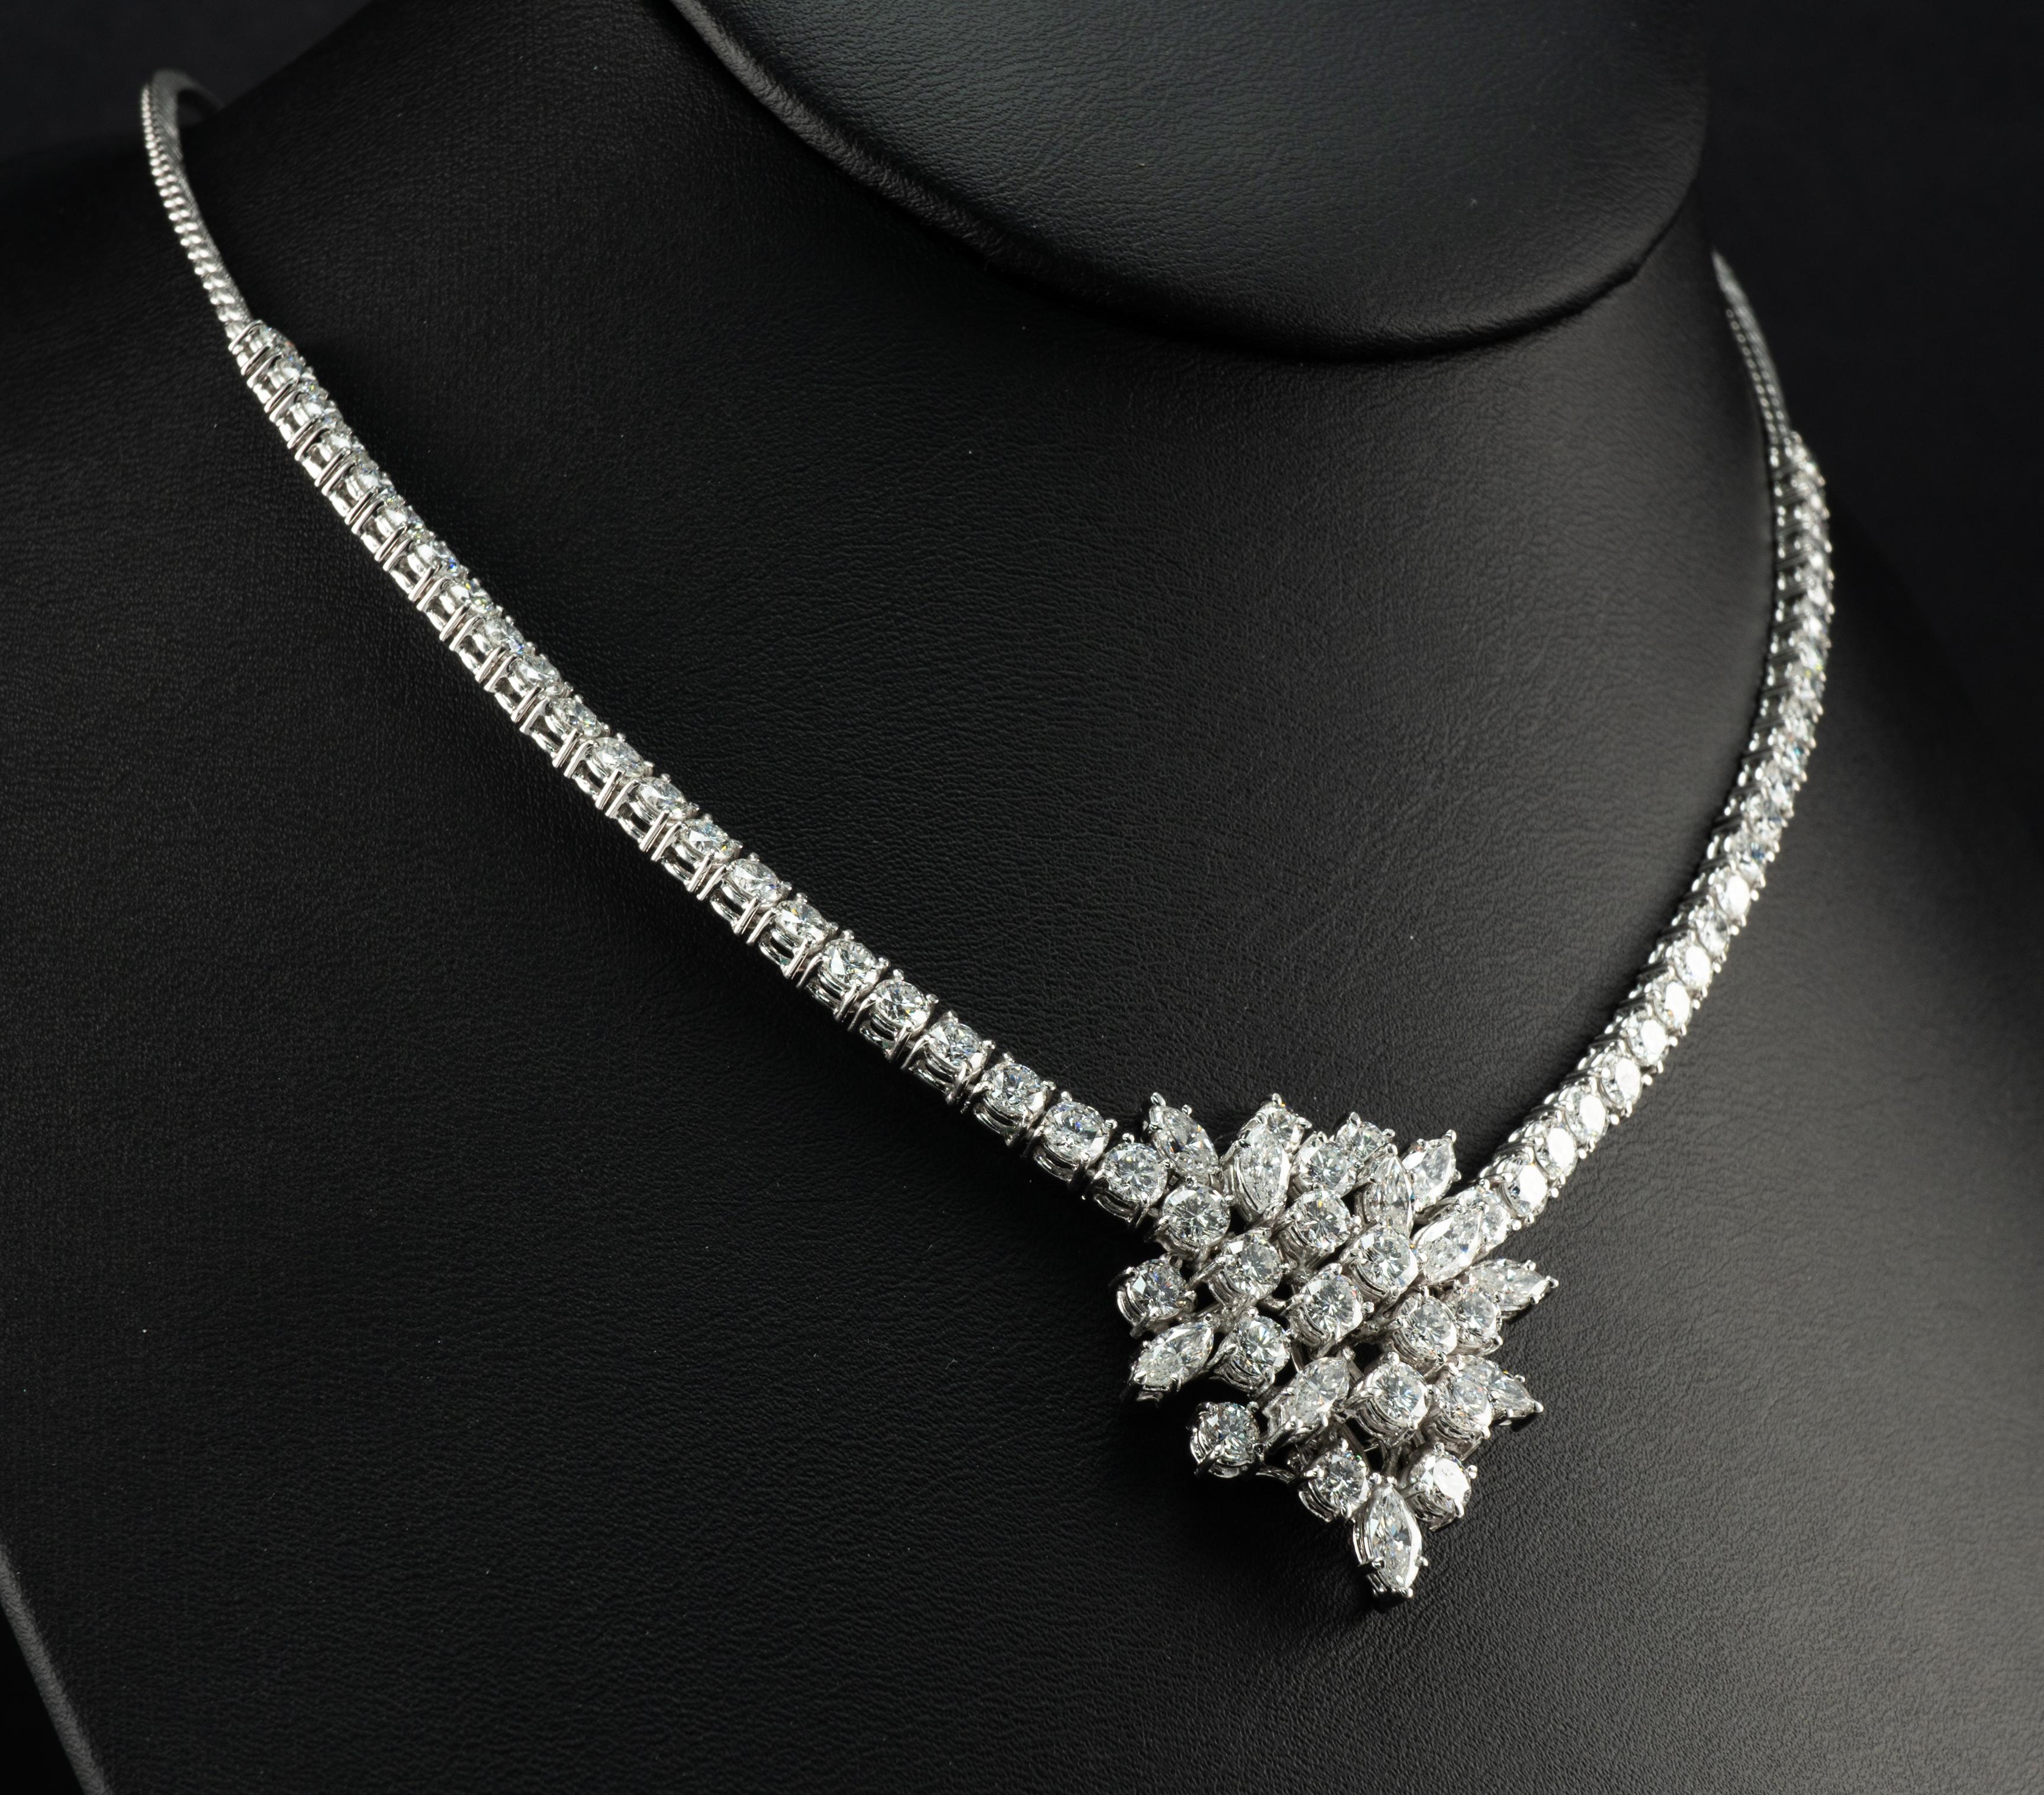 Natural Diamond Necklace Choker Vintage 14K White Gold 9.52 TDW

This necklace is made in solid 14K White Gold and set with natural genuine diamonds.
The center presentation is set with 16 round brilliant cut diamonds and 10 marquise cut diamonds